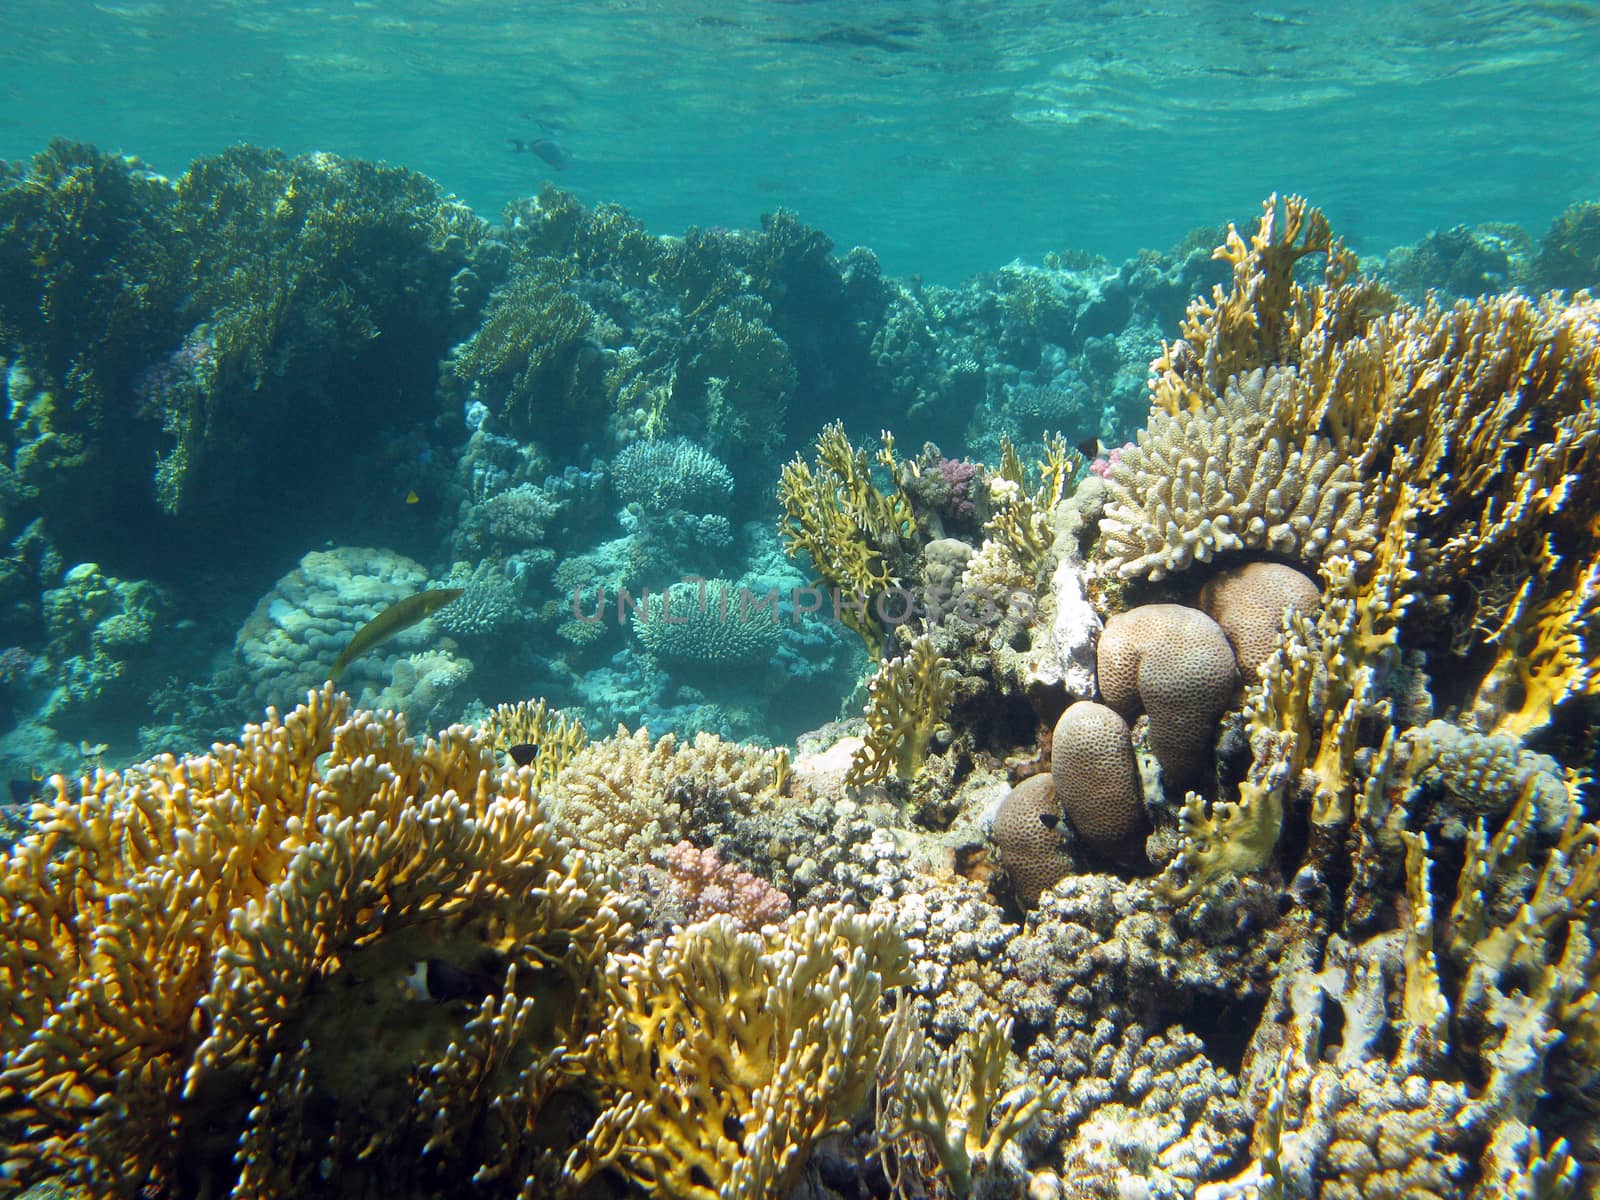 coral reef with fire corals in tropical sea, underwater by mychadre77